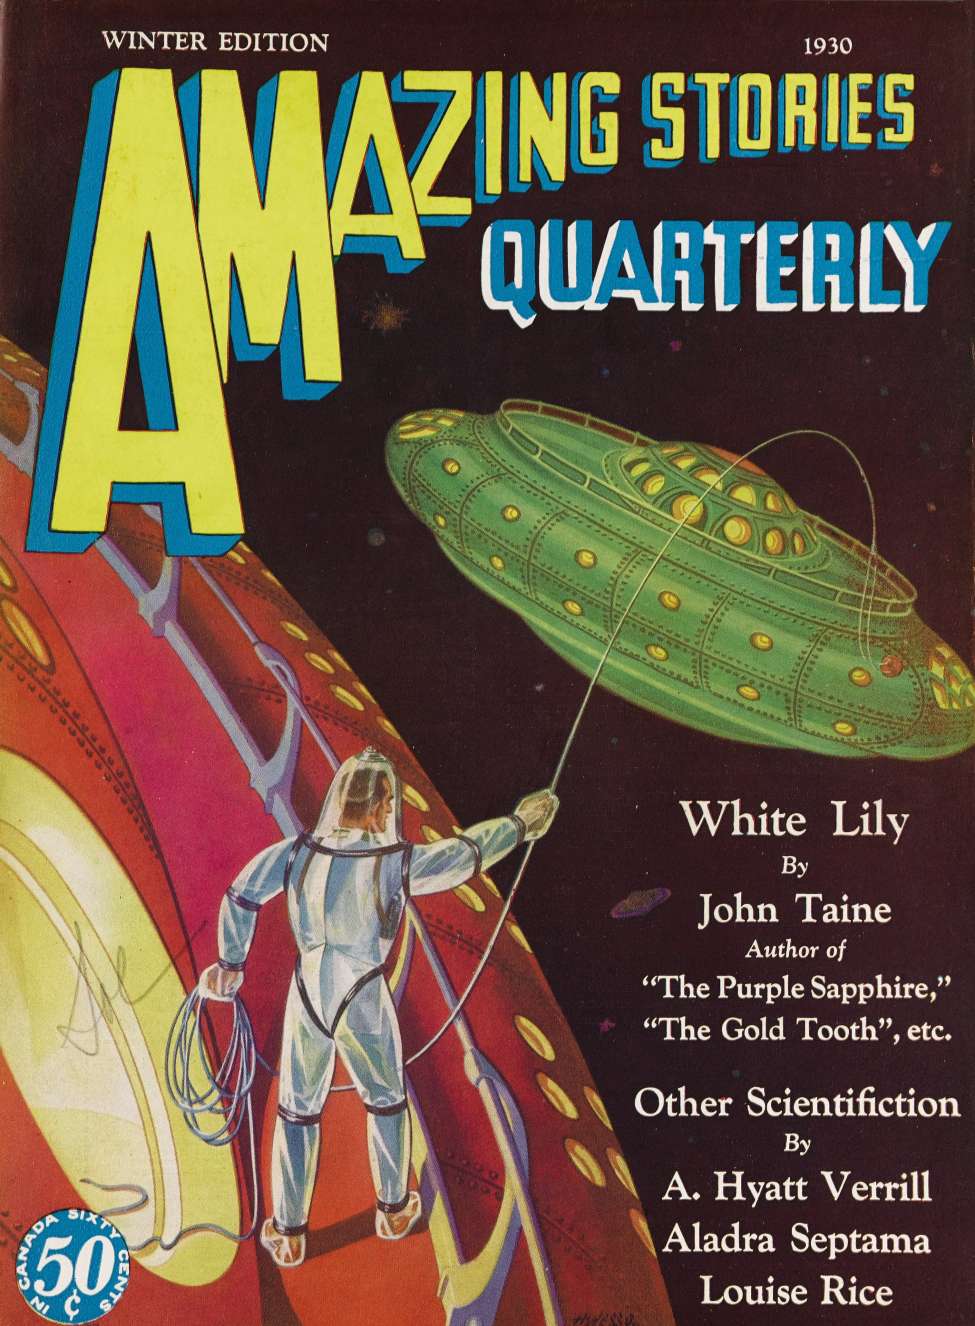 Comic Book Cover For Amazing Stories Quarterly v3 1 - White Lily - John Taine